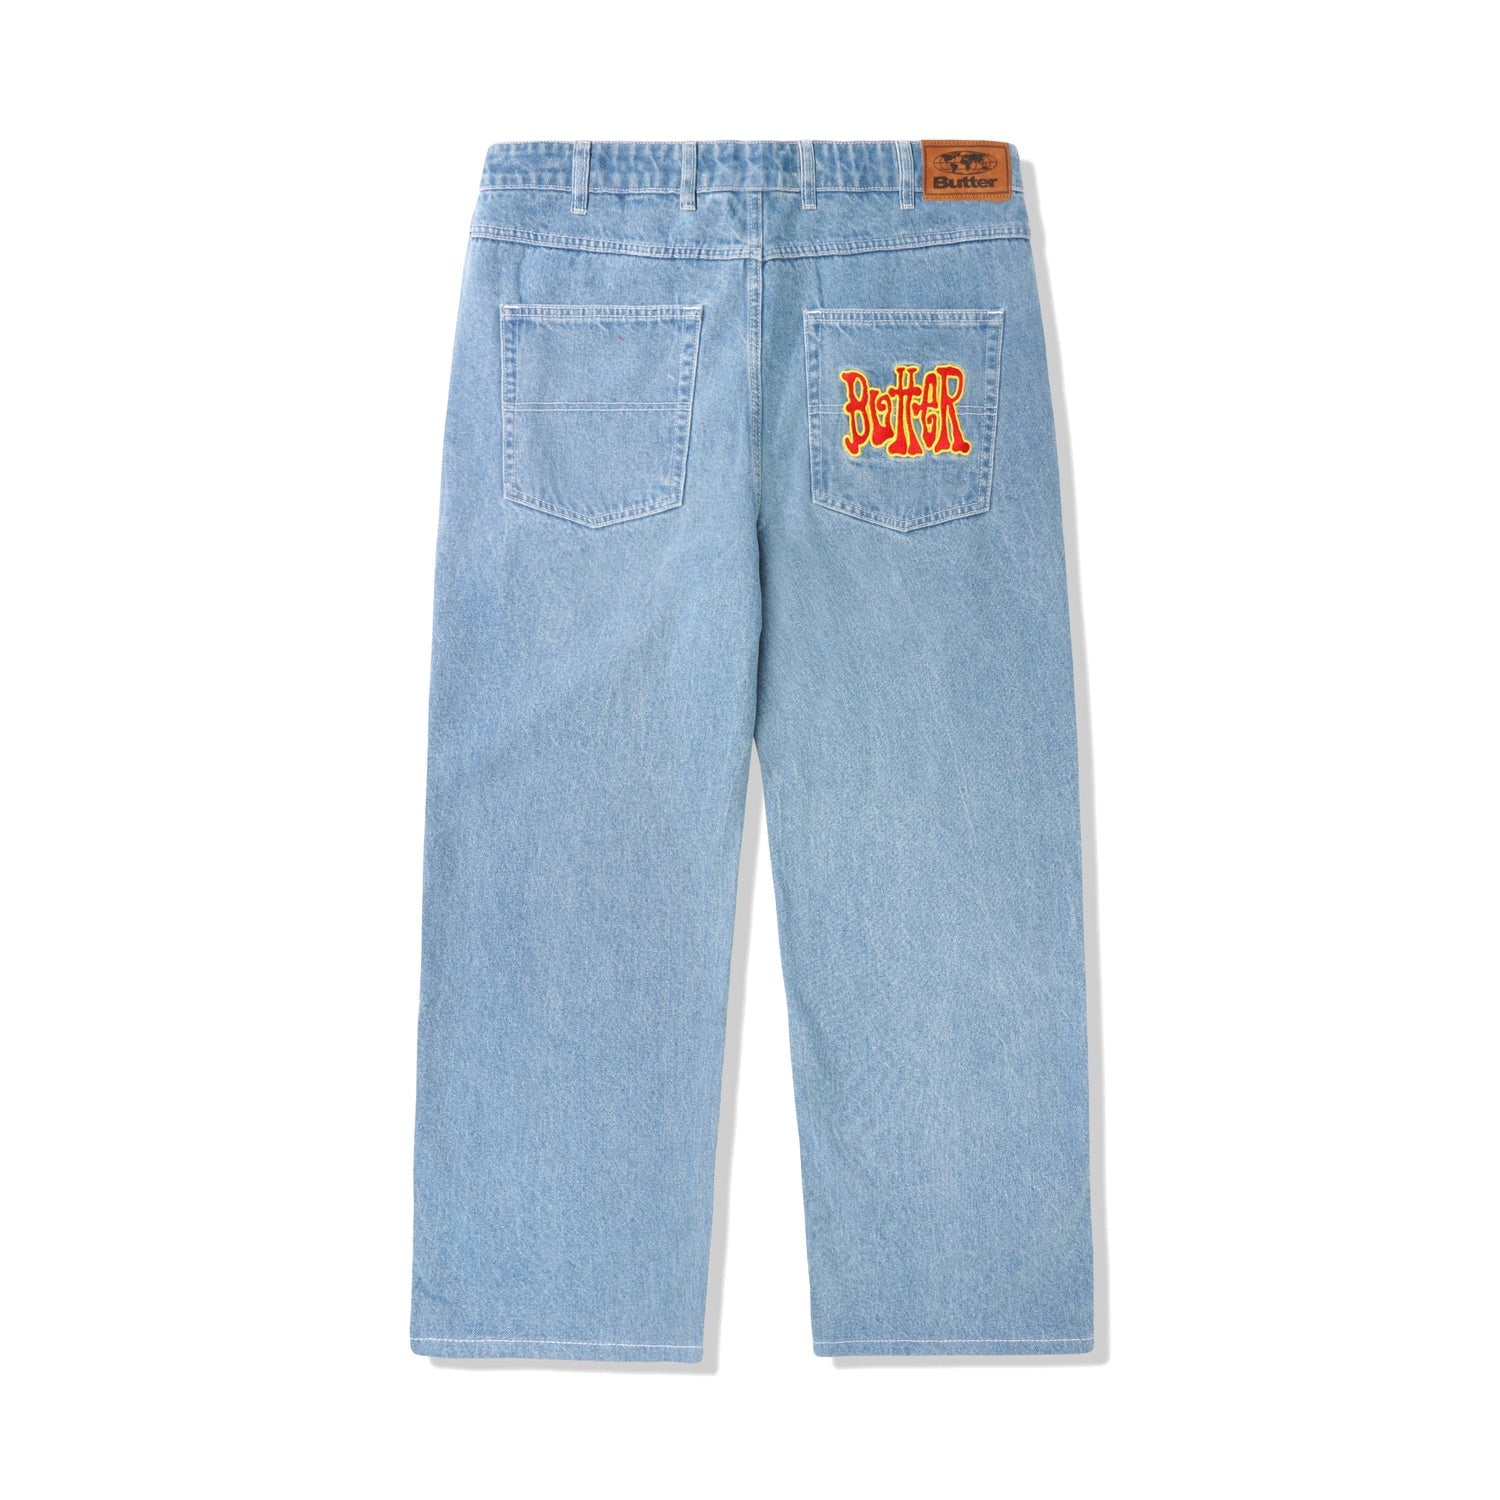 Butter Goods Tour Jeans - Washed Indigo